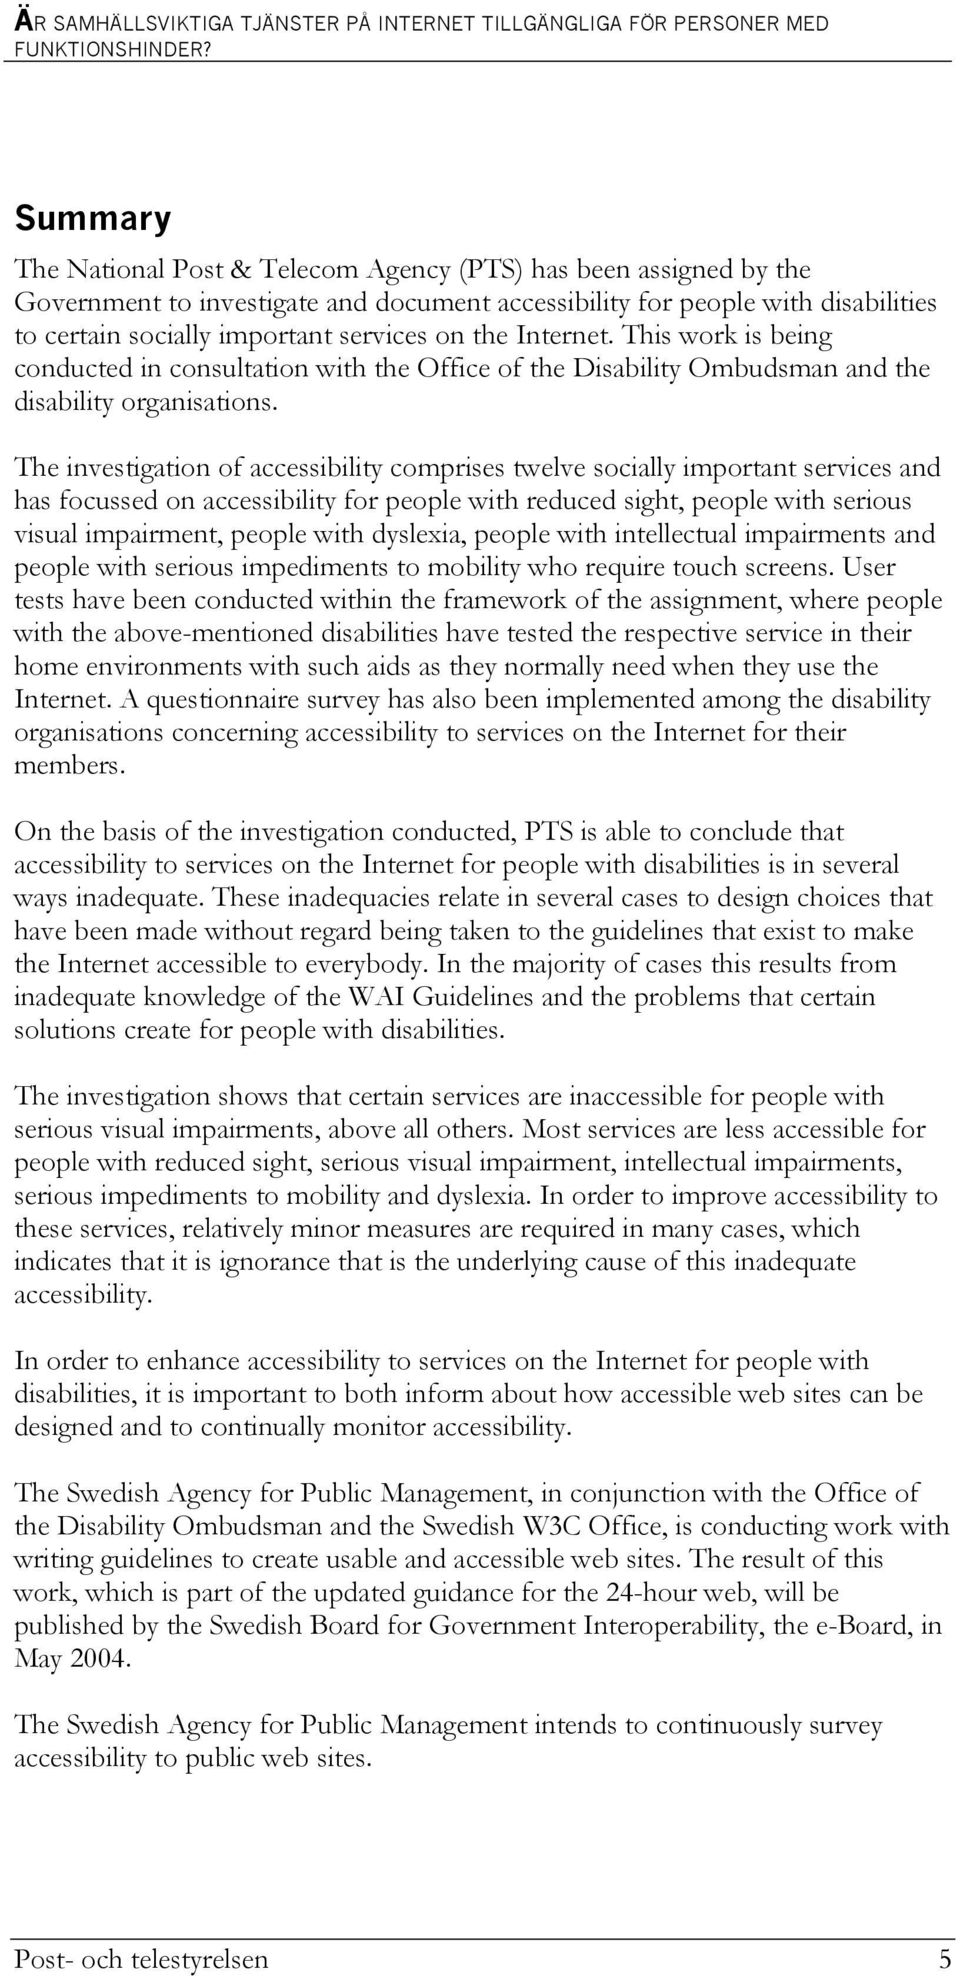 the Internet. This work is being conducted in consultation with the Office of the Disability Ombudsman and the disability organisations.